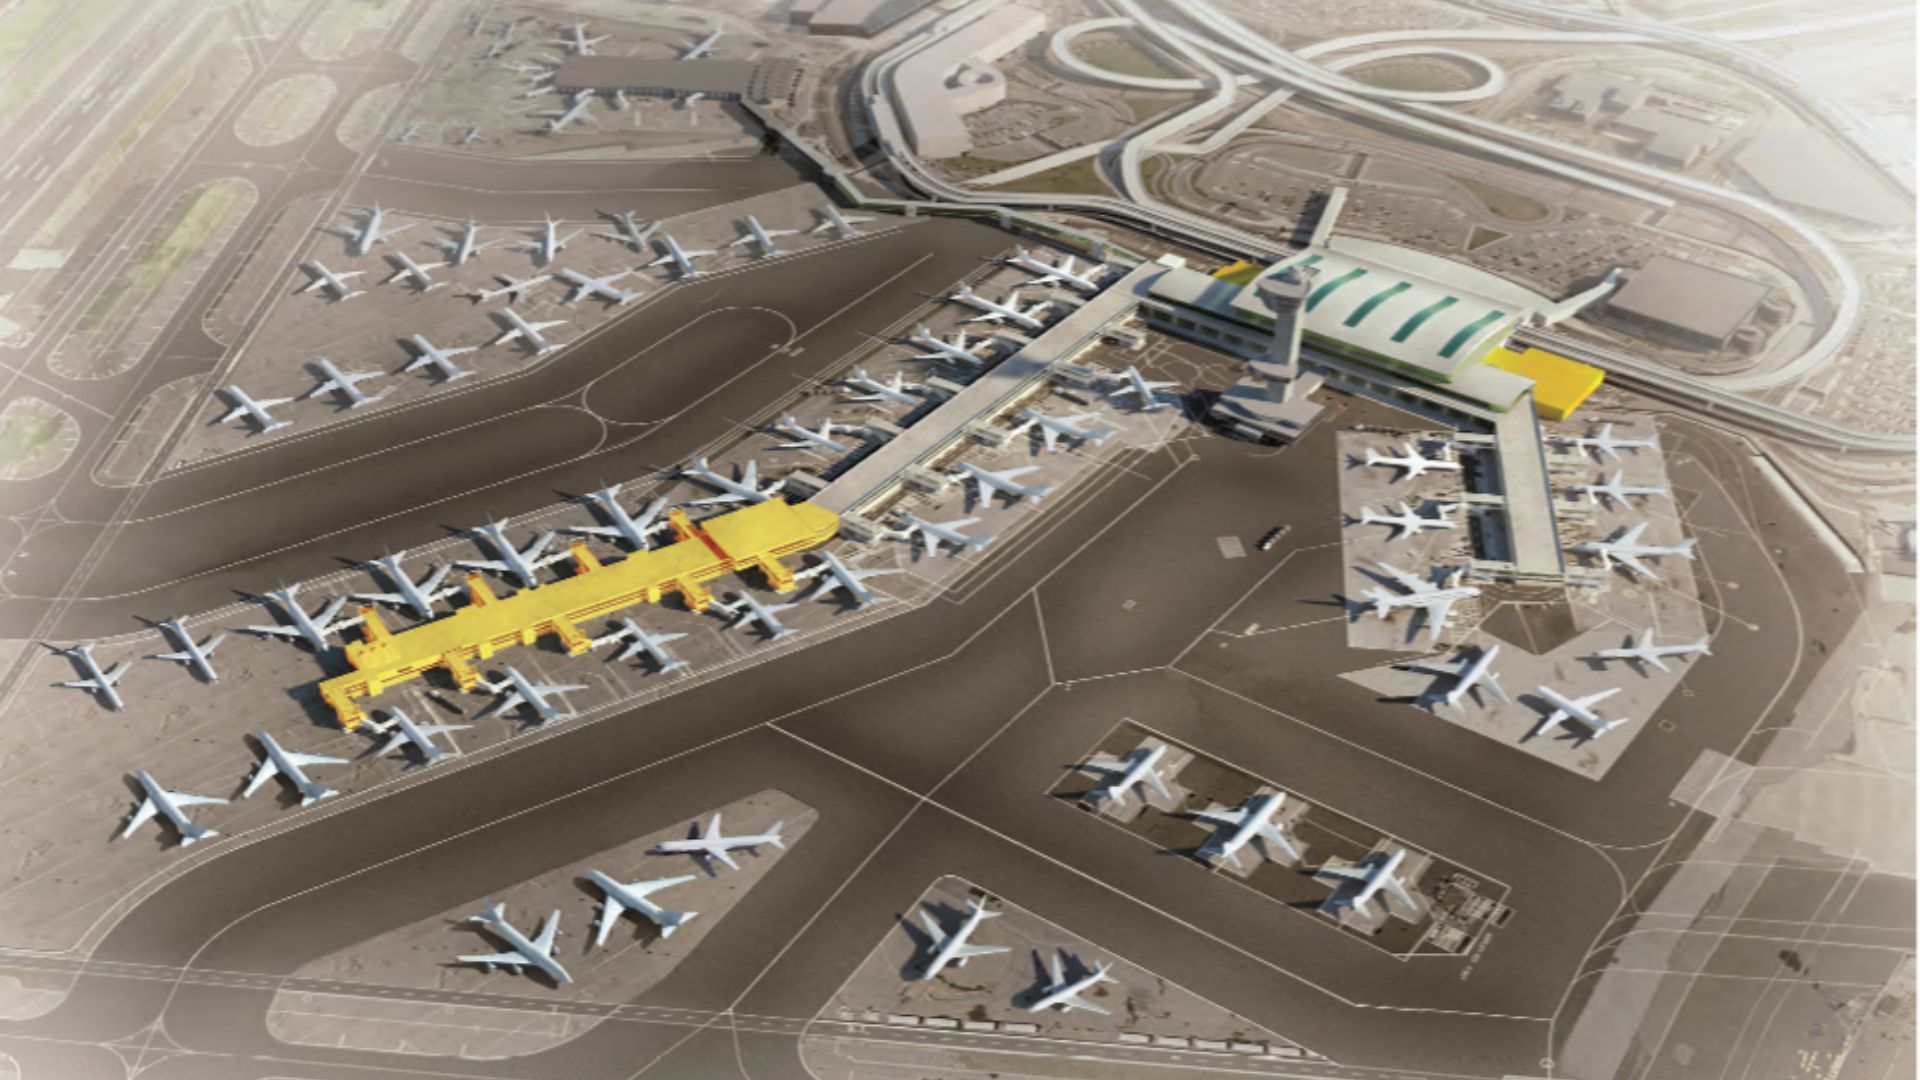 Rendering of an airport terminal from in sepia tones with the area of expansion in yellow.